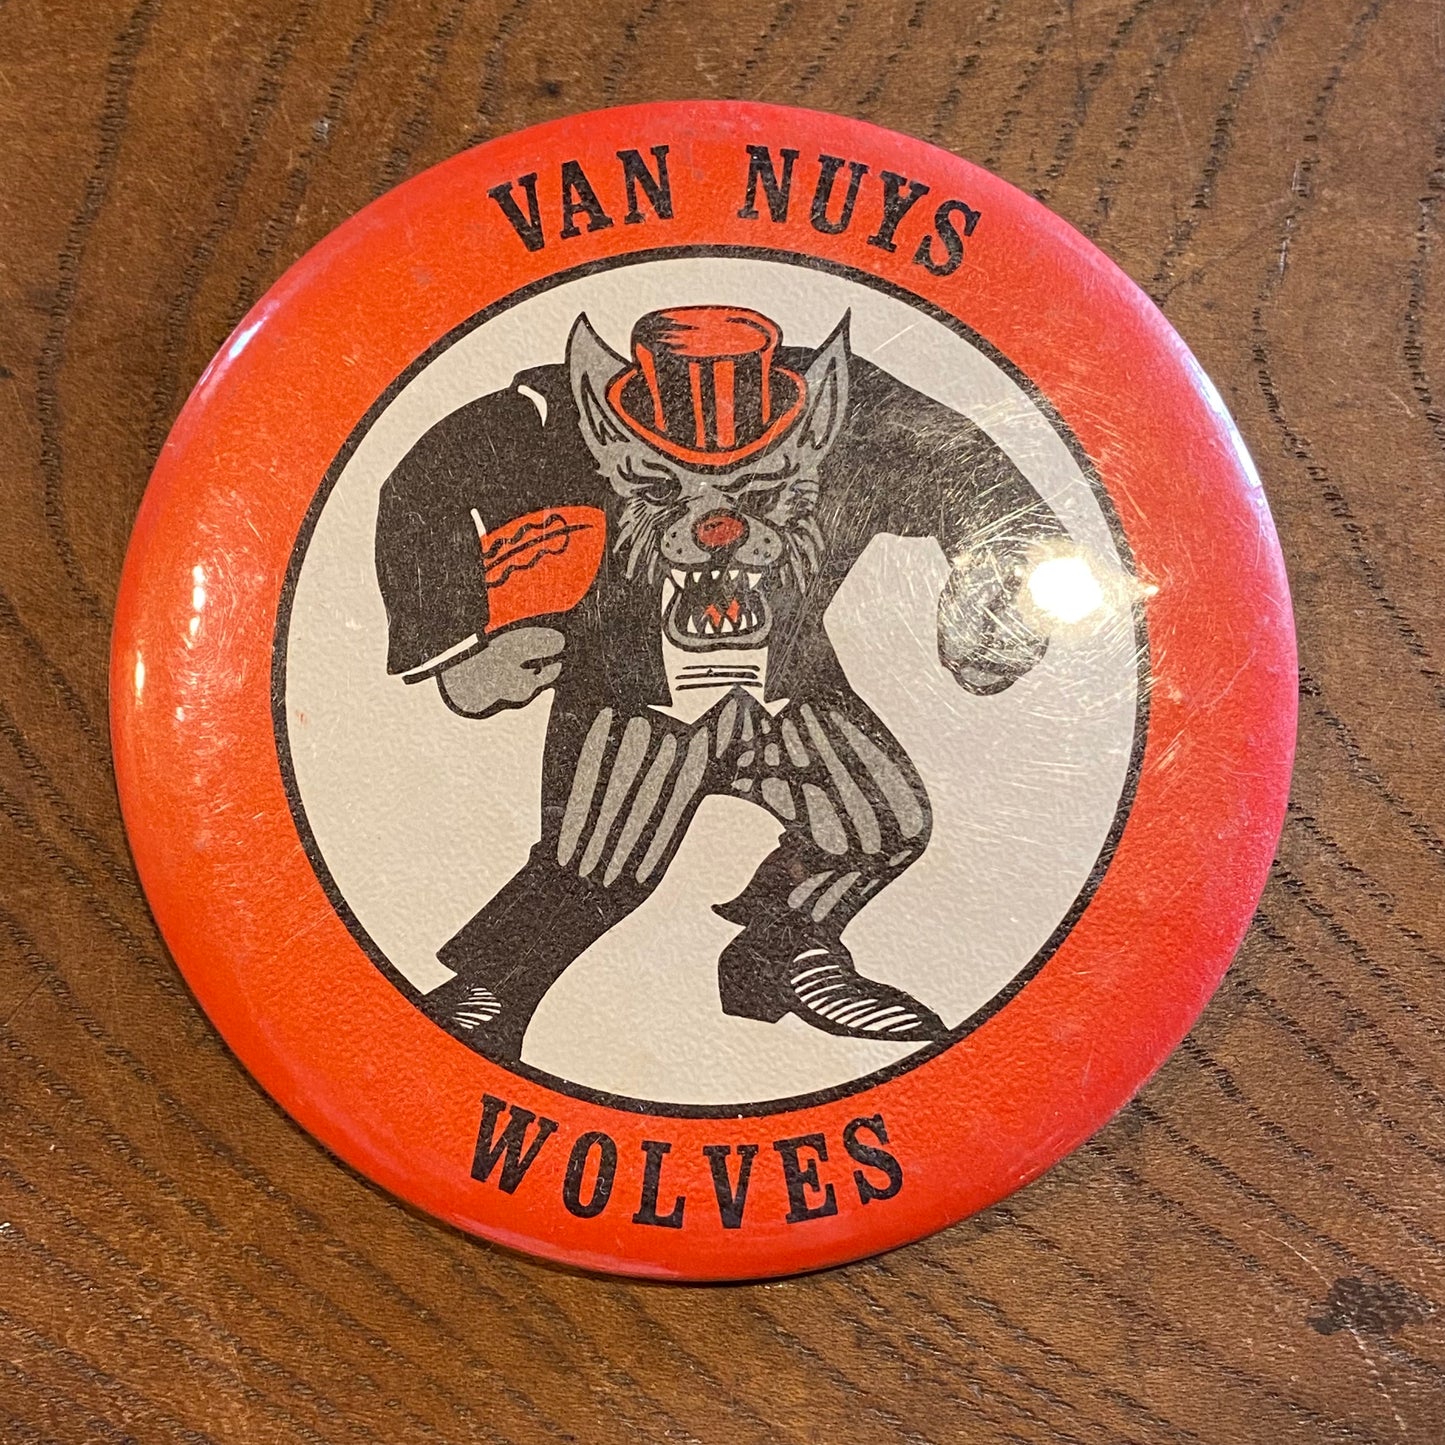 【USA vintage】缶バッジ VAN NUYS WOLVES